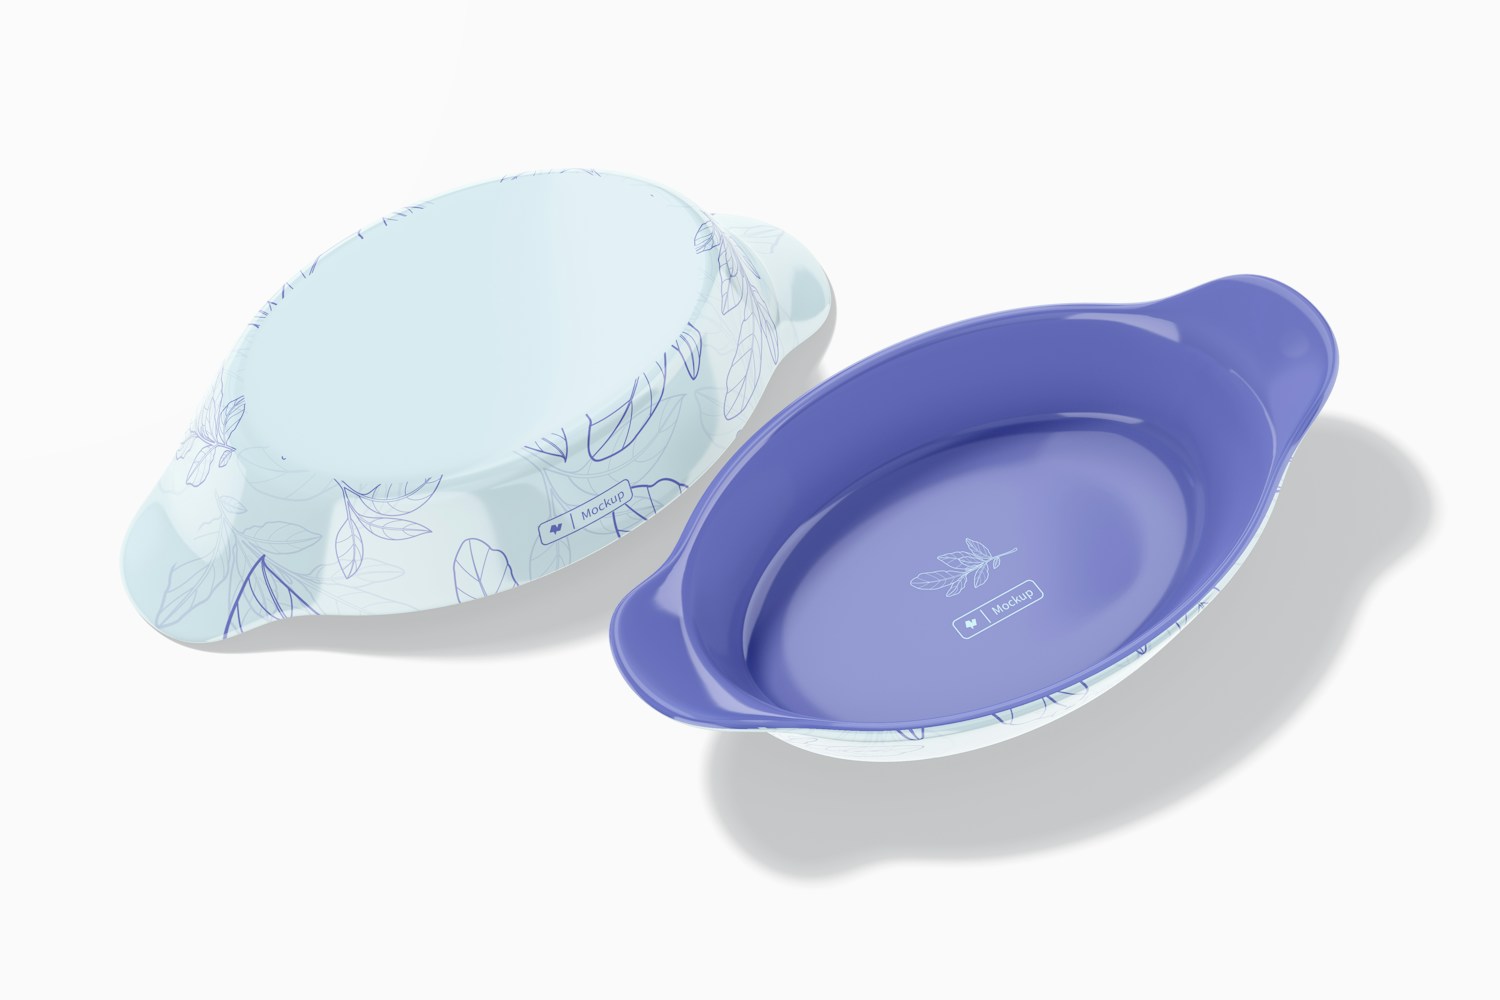 Oval Plate with Handles Mockup, Top View